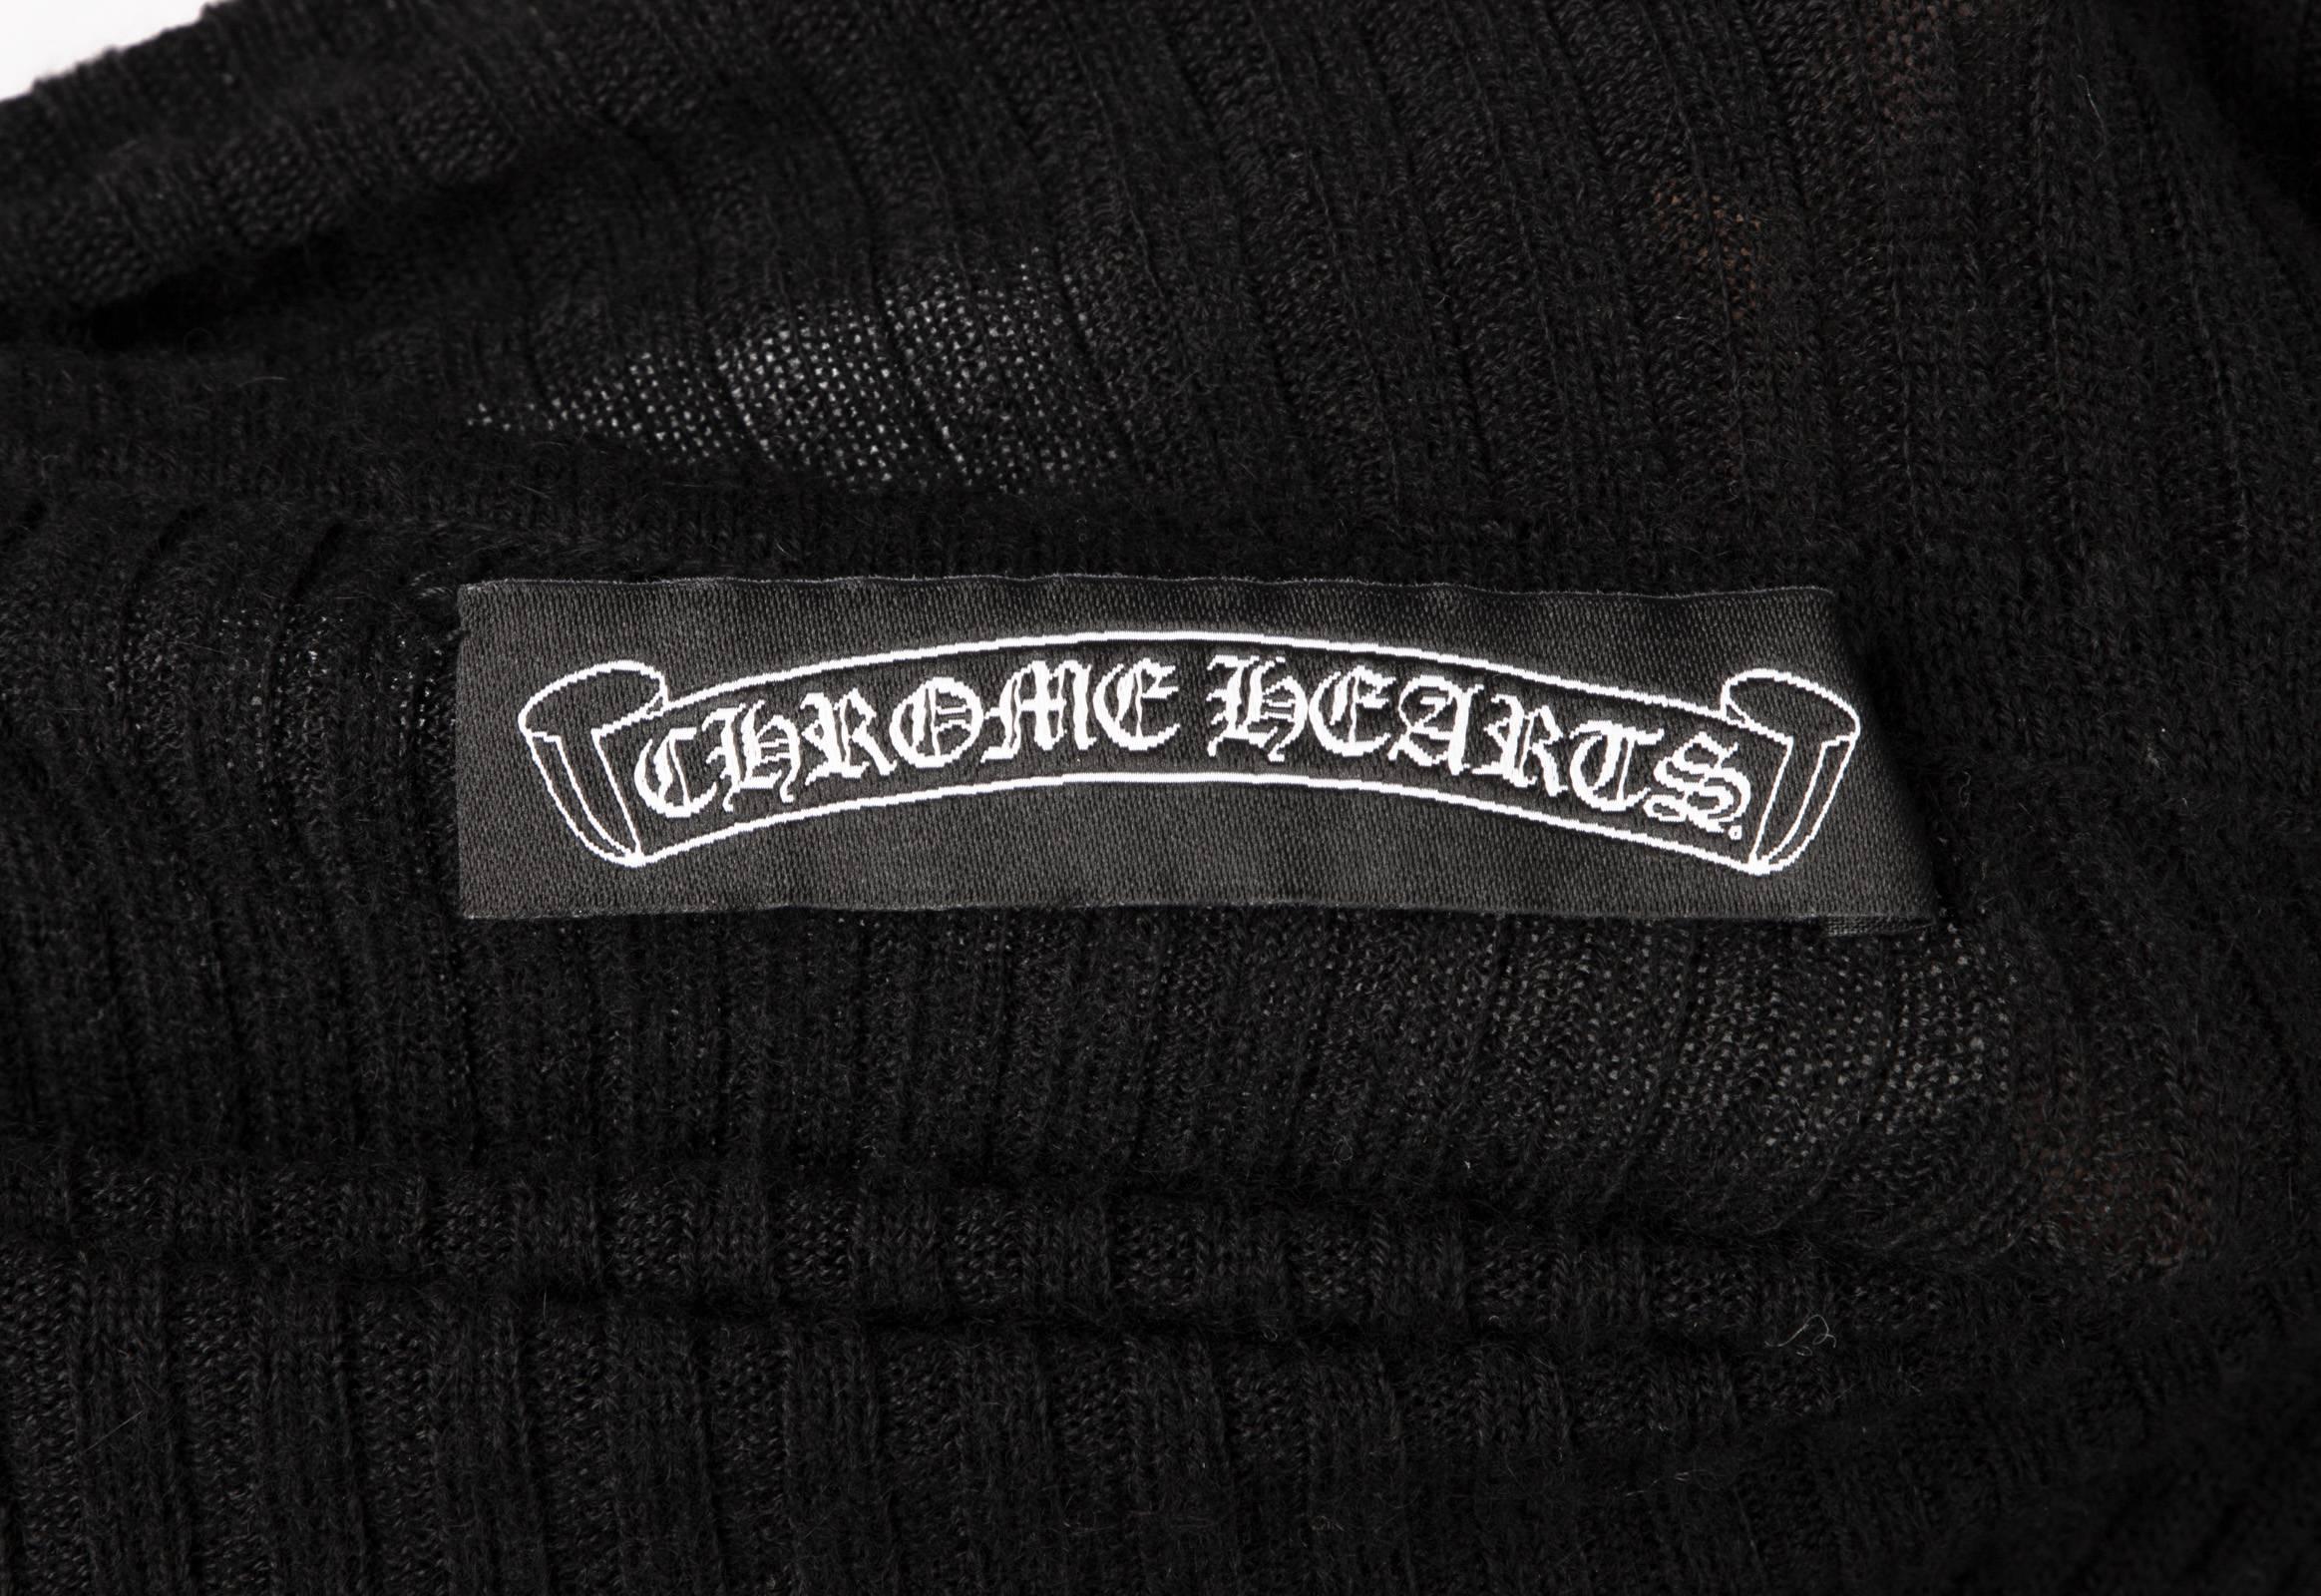 Women's Chrome Hearts Top Cashmere Turtleneck Sterling Silver Buttons Leather Cross M